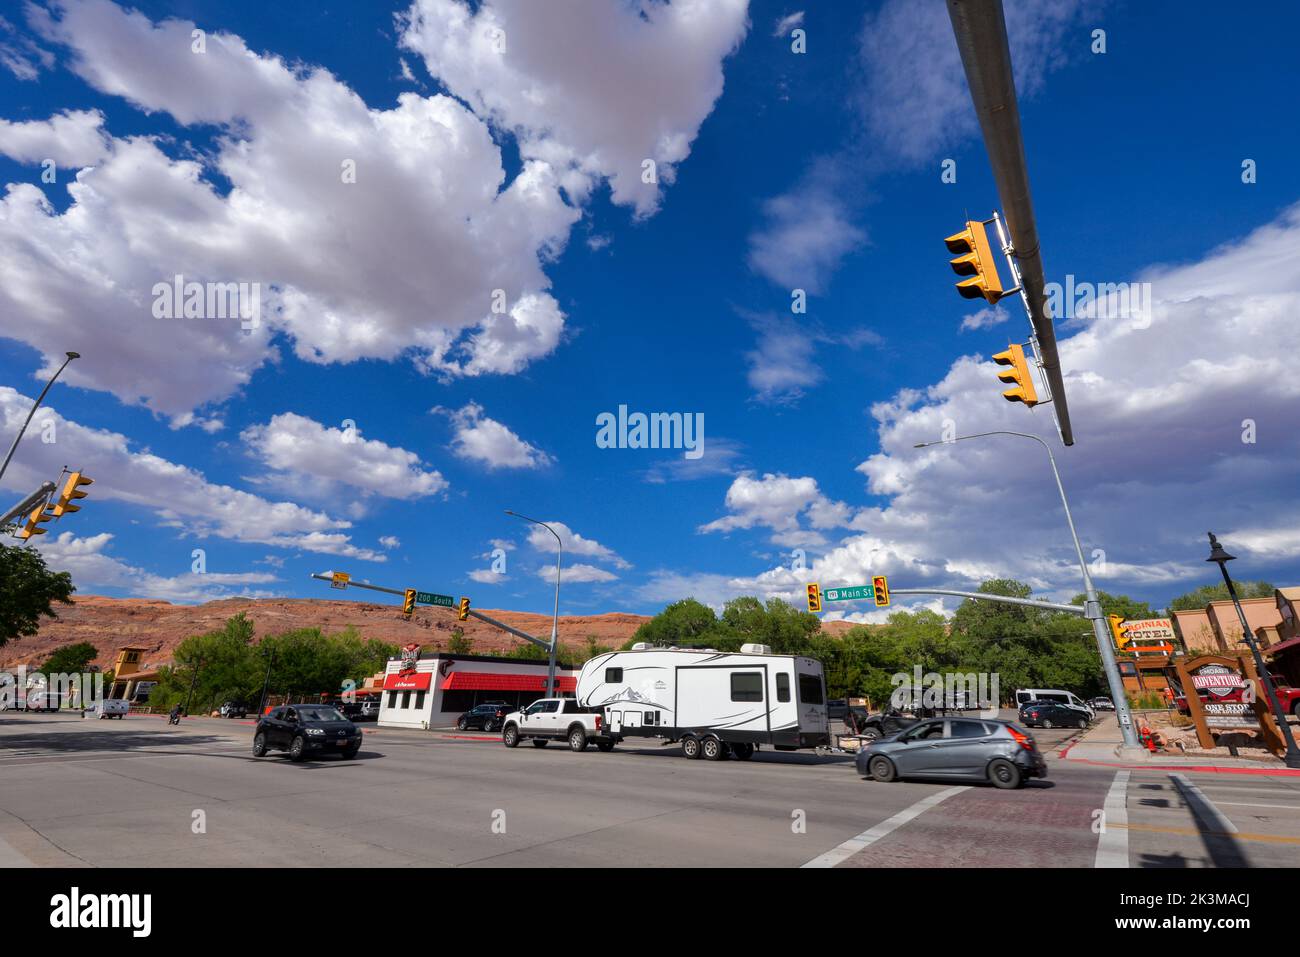 Street view of the traffic at a crossroads in Moab Utah USA Stock Photo